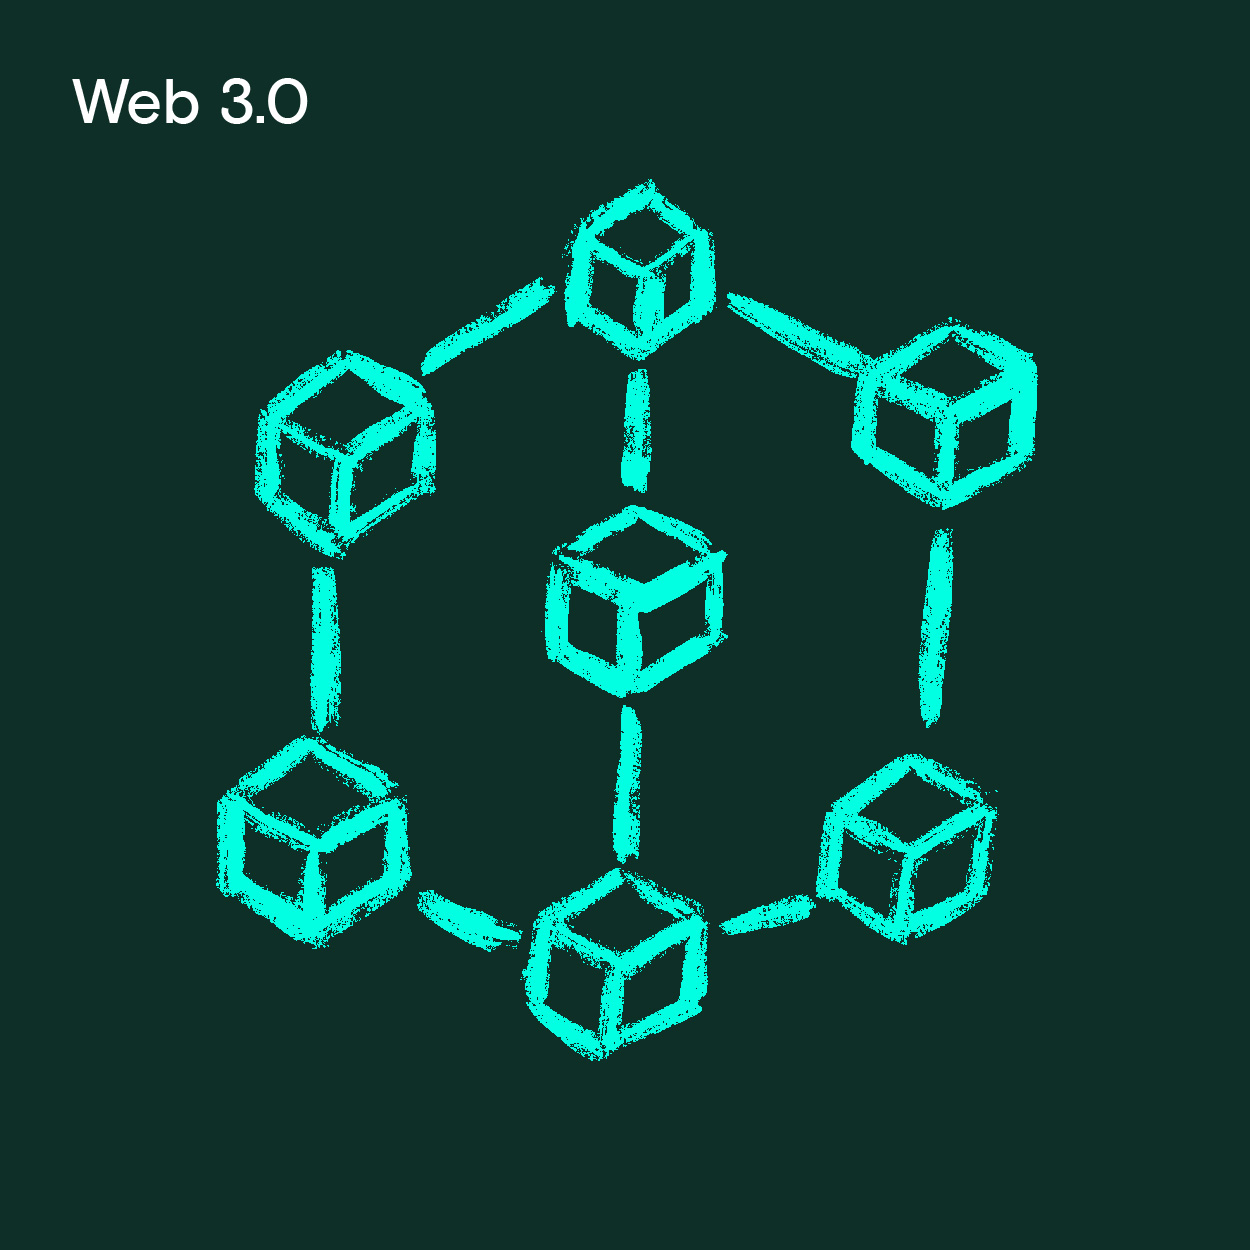 Web 3.0 - hand drawn infographic - a series of boxes representing Web3 - ownership of digital assets connected with lines.